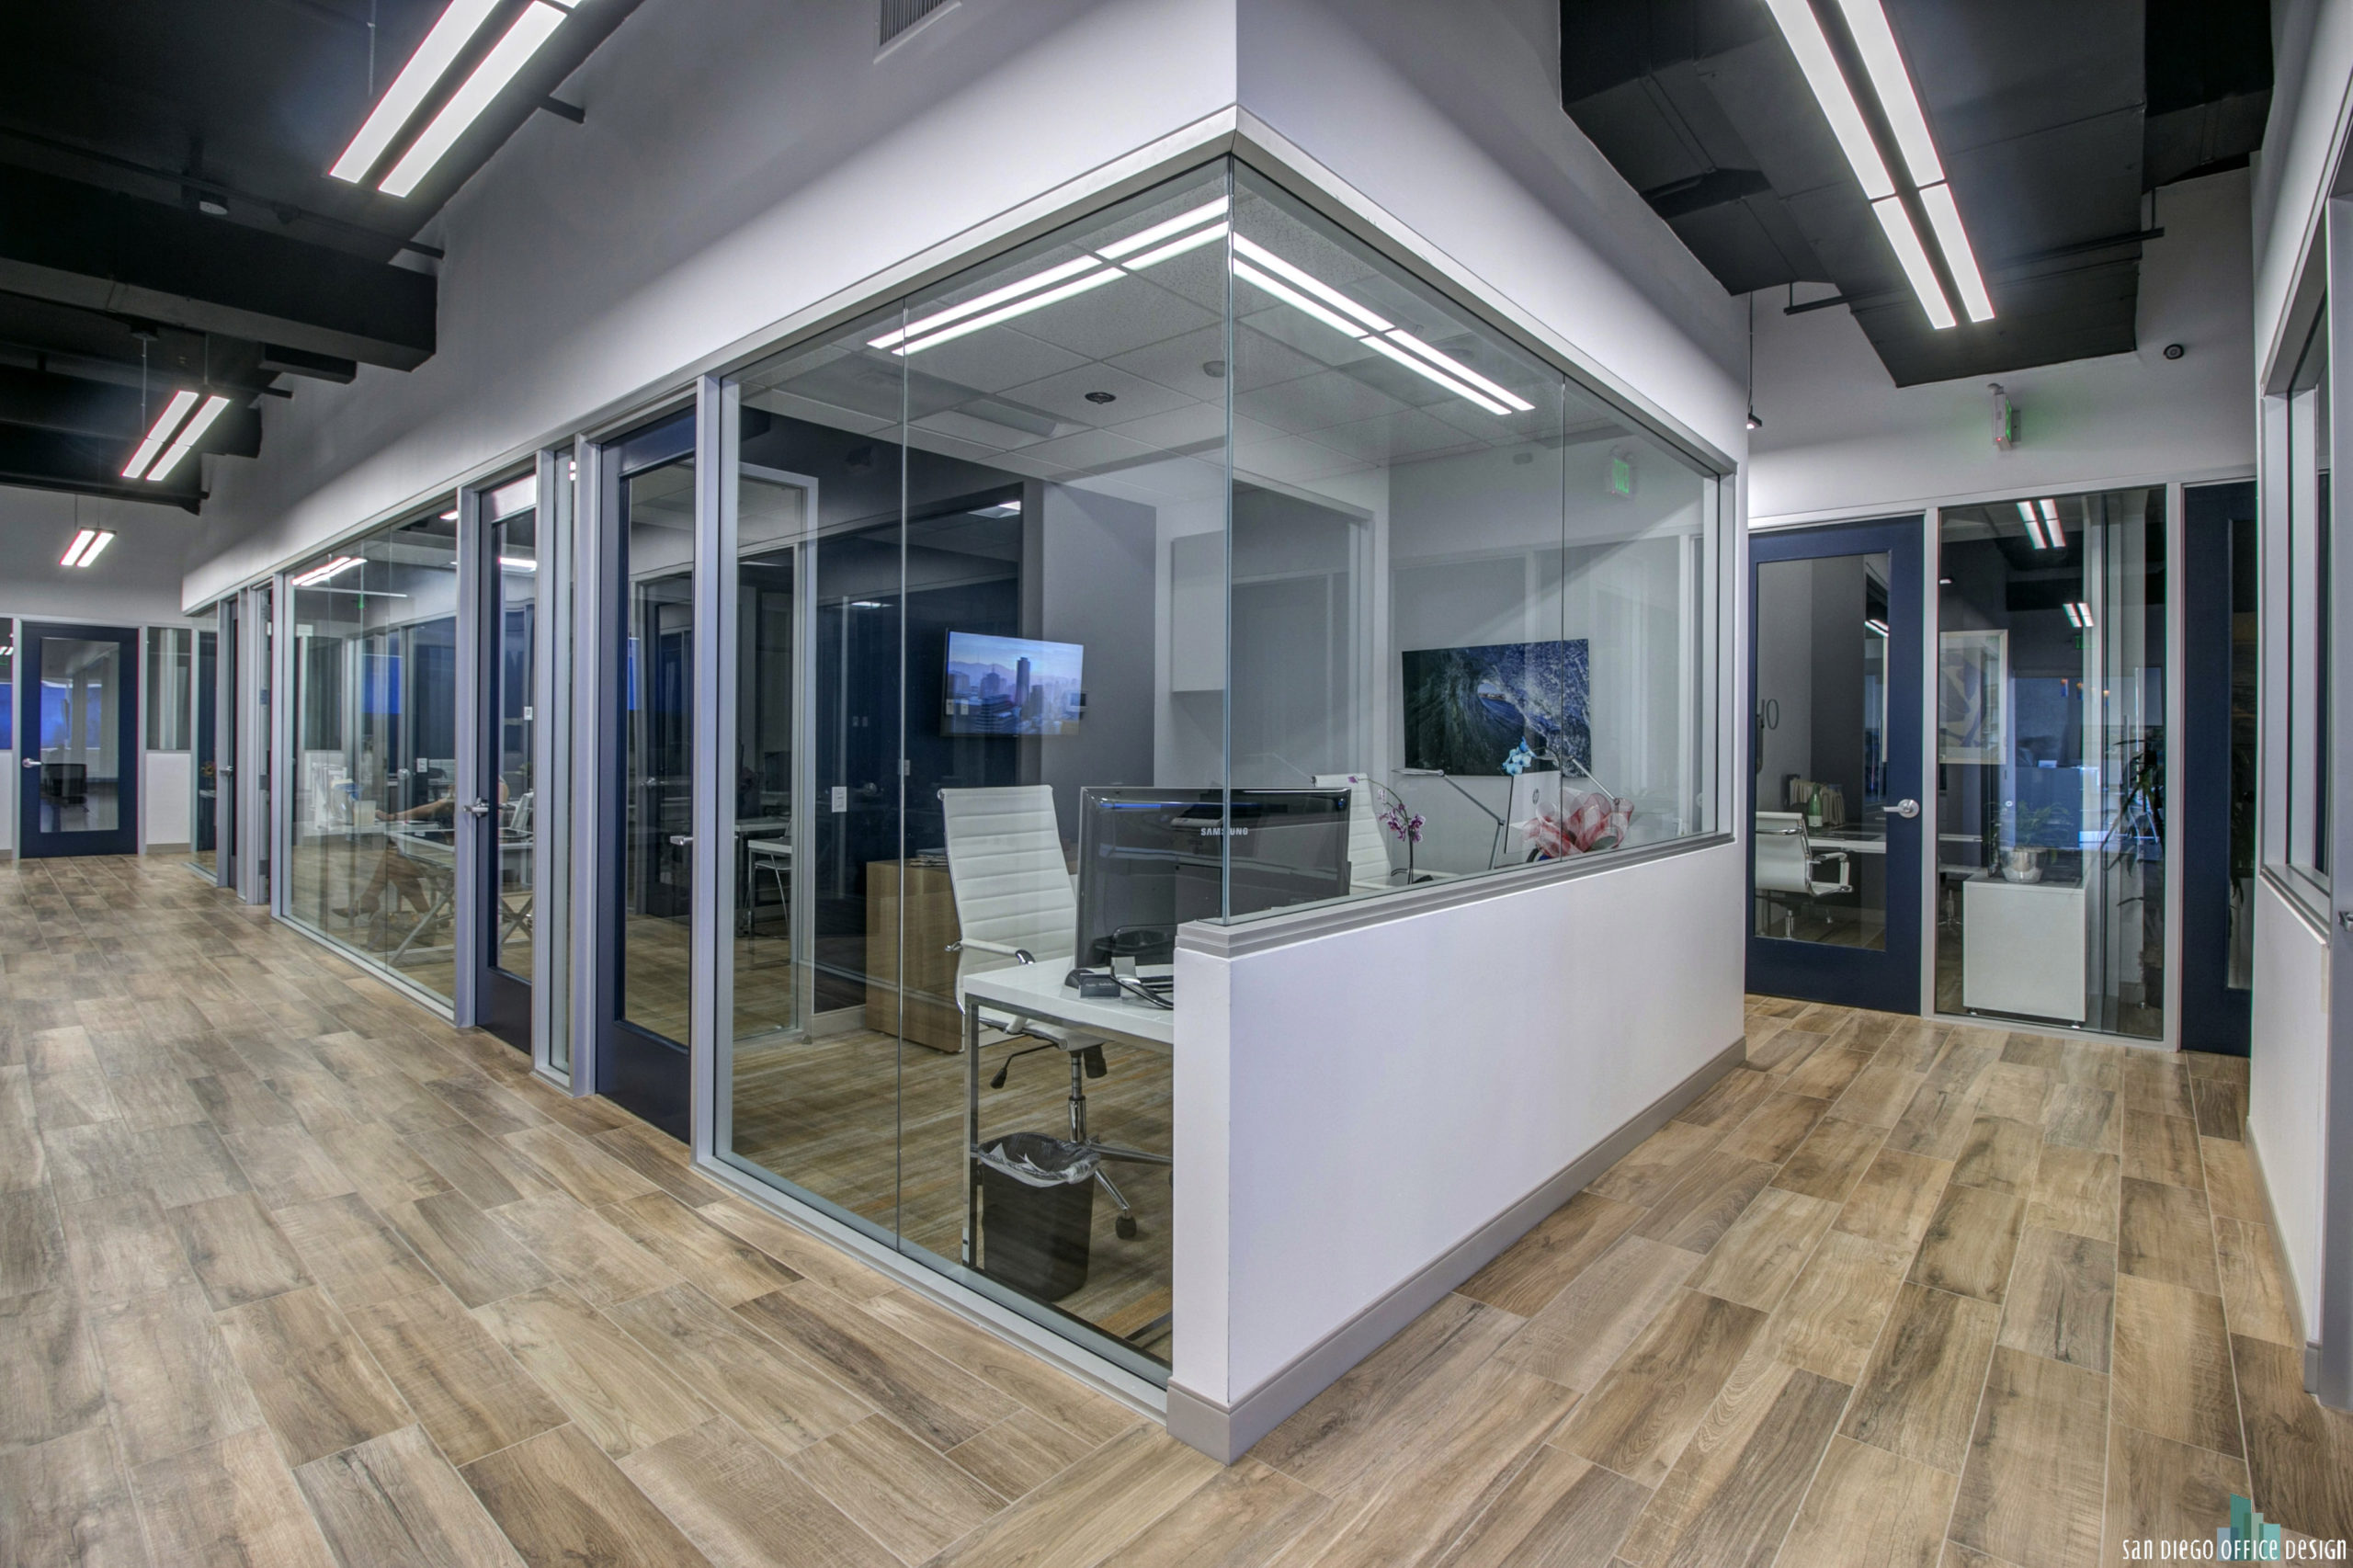 A row of offices with glass wall partitions, wood floors, and clean white walls between them